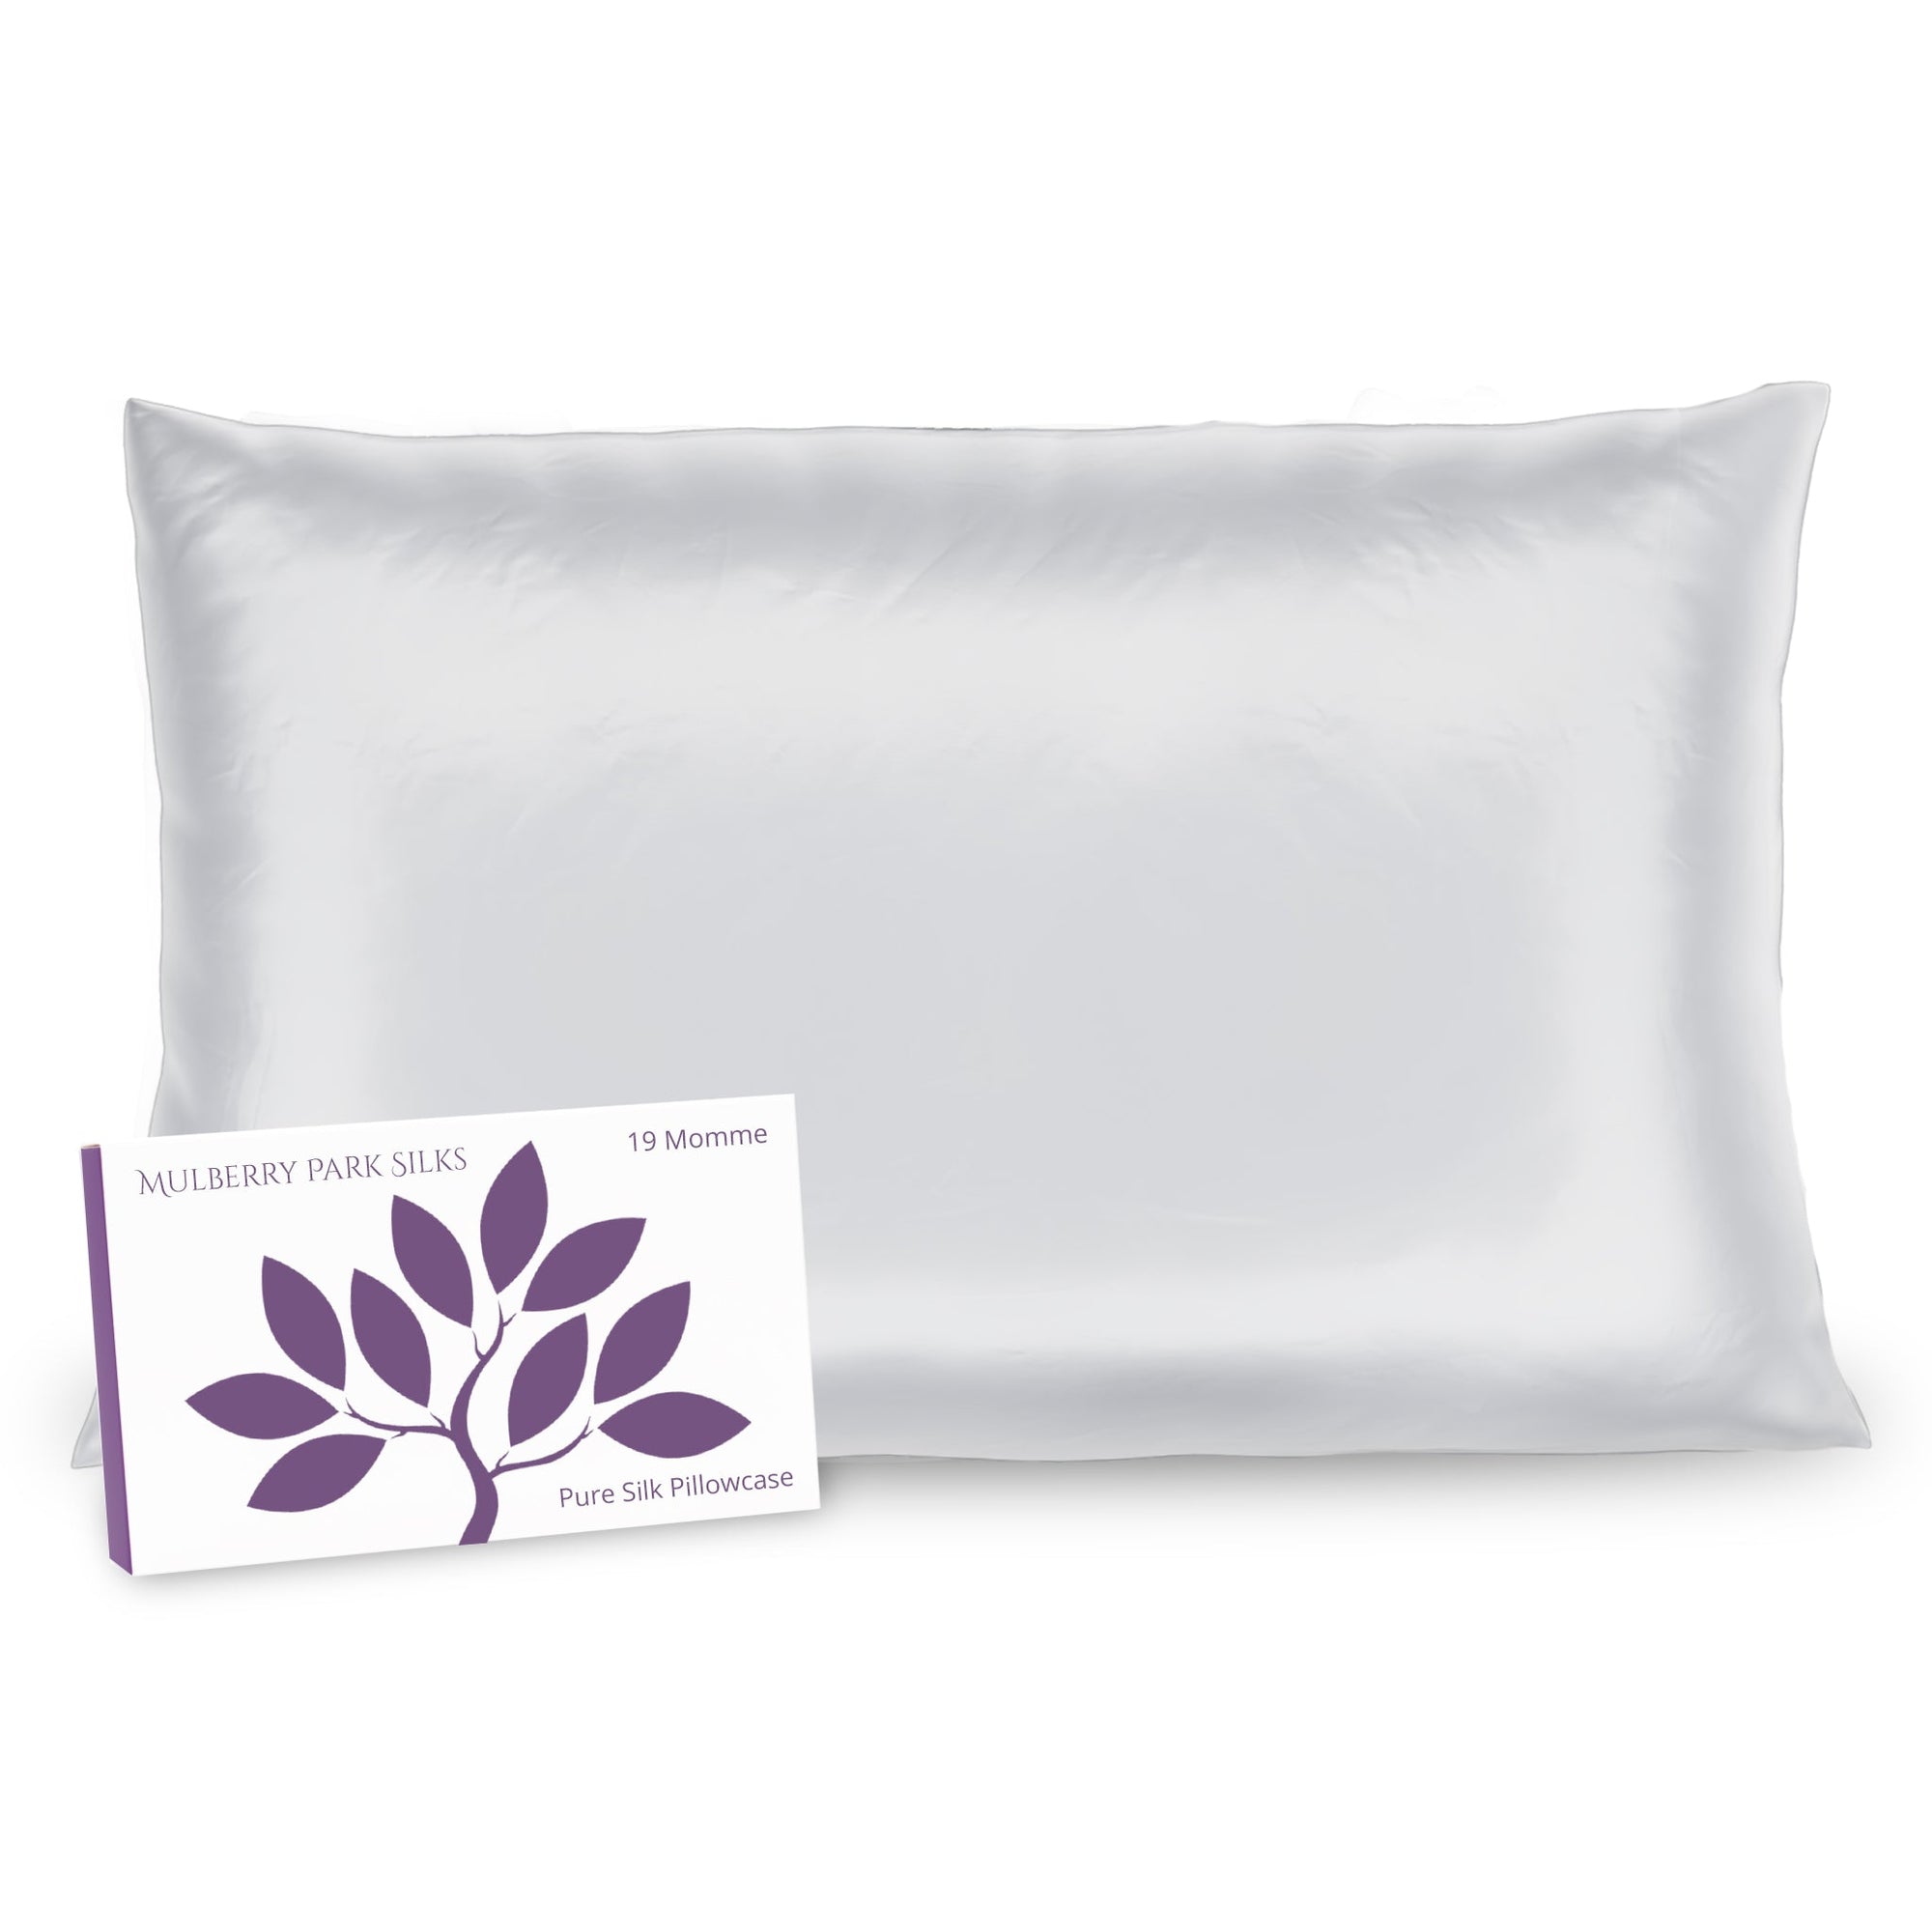 Mulberry Park Silks 19 Momme Silk Pillowcase White with box packaging